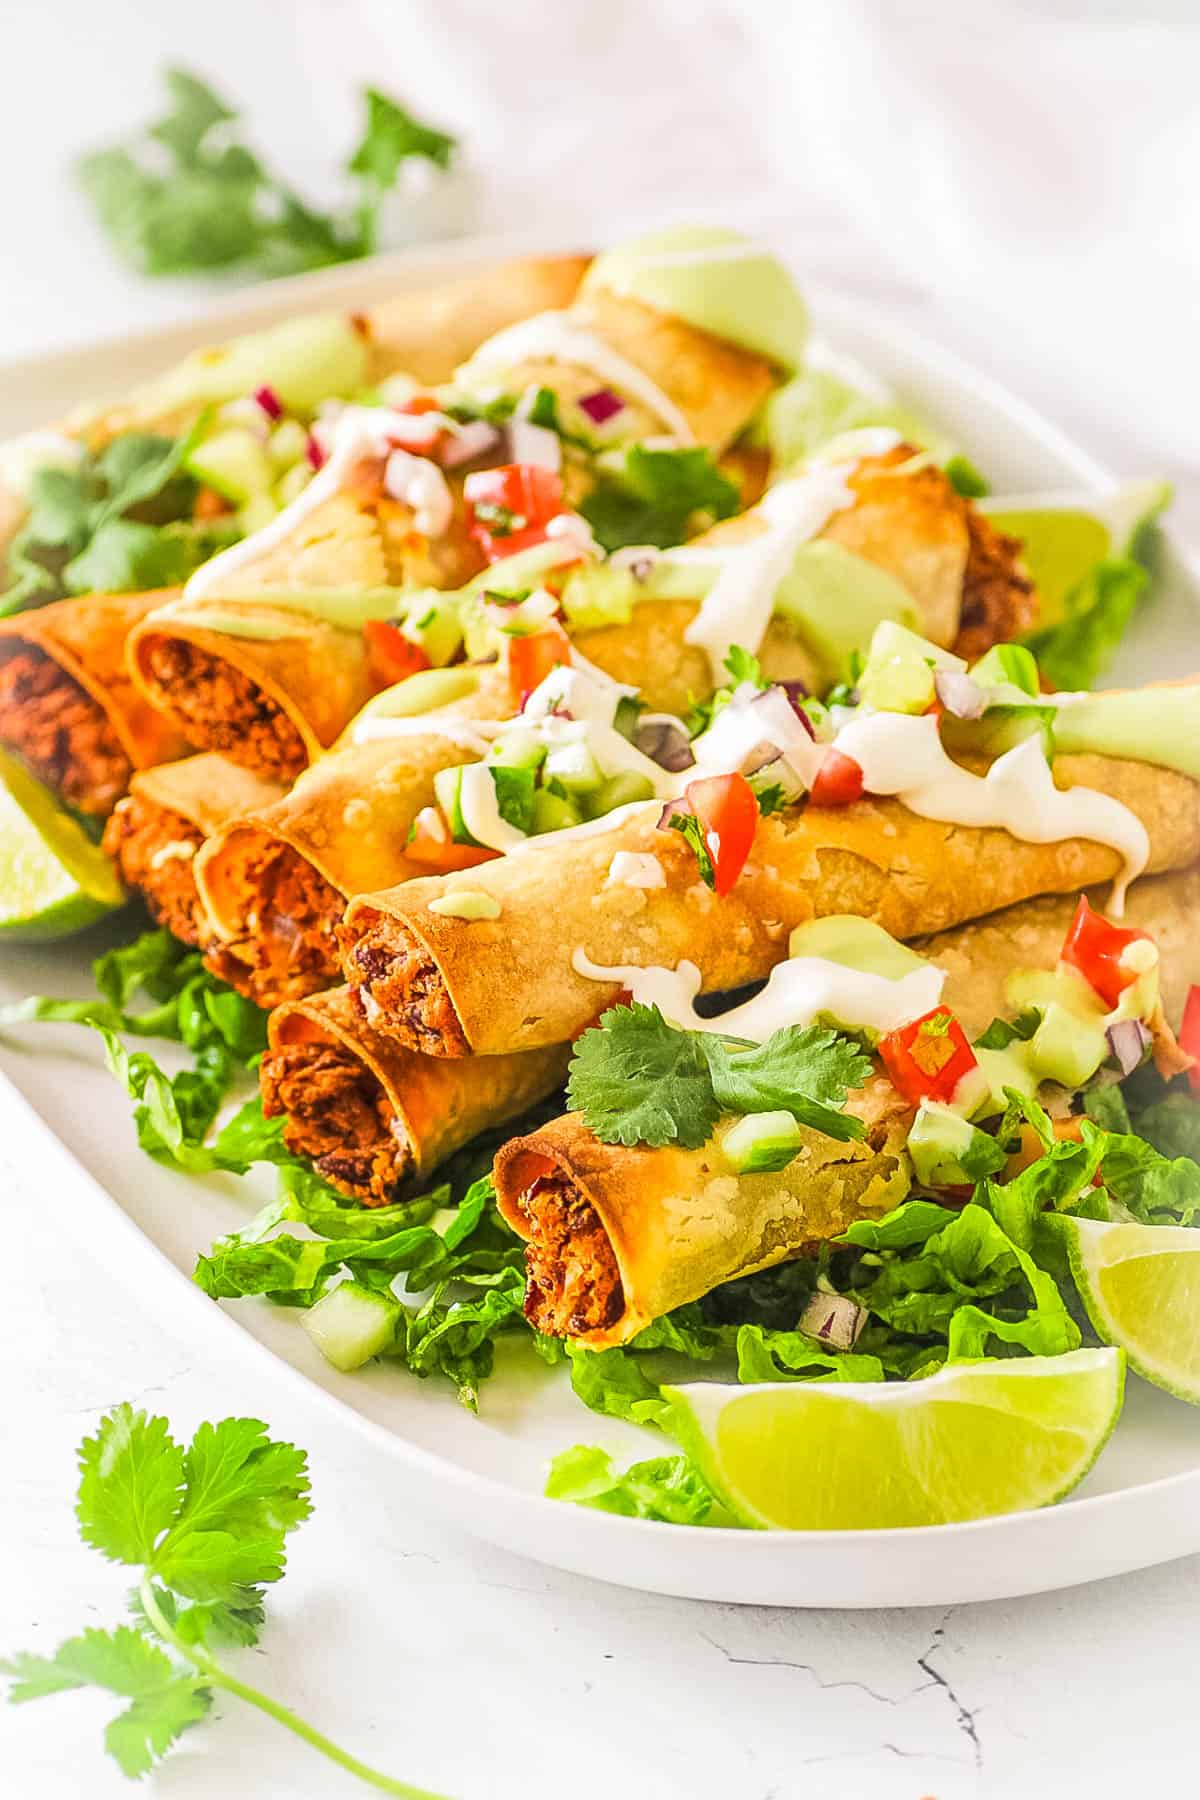 Easy vegan taquitos topped with vegan sour cream, salsa and served on a white platter with lettuce and limes.